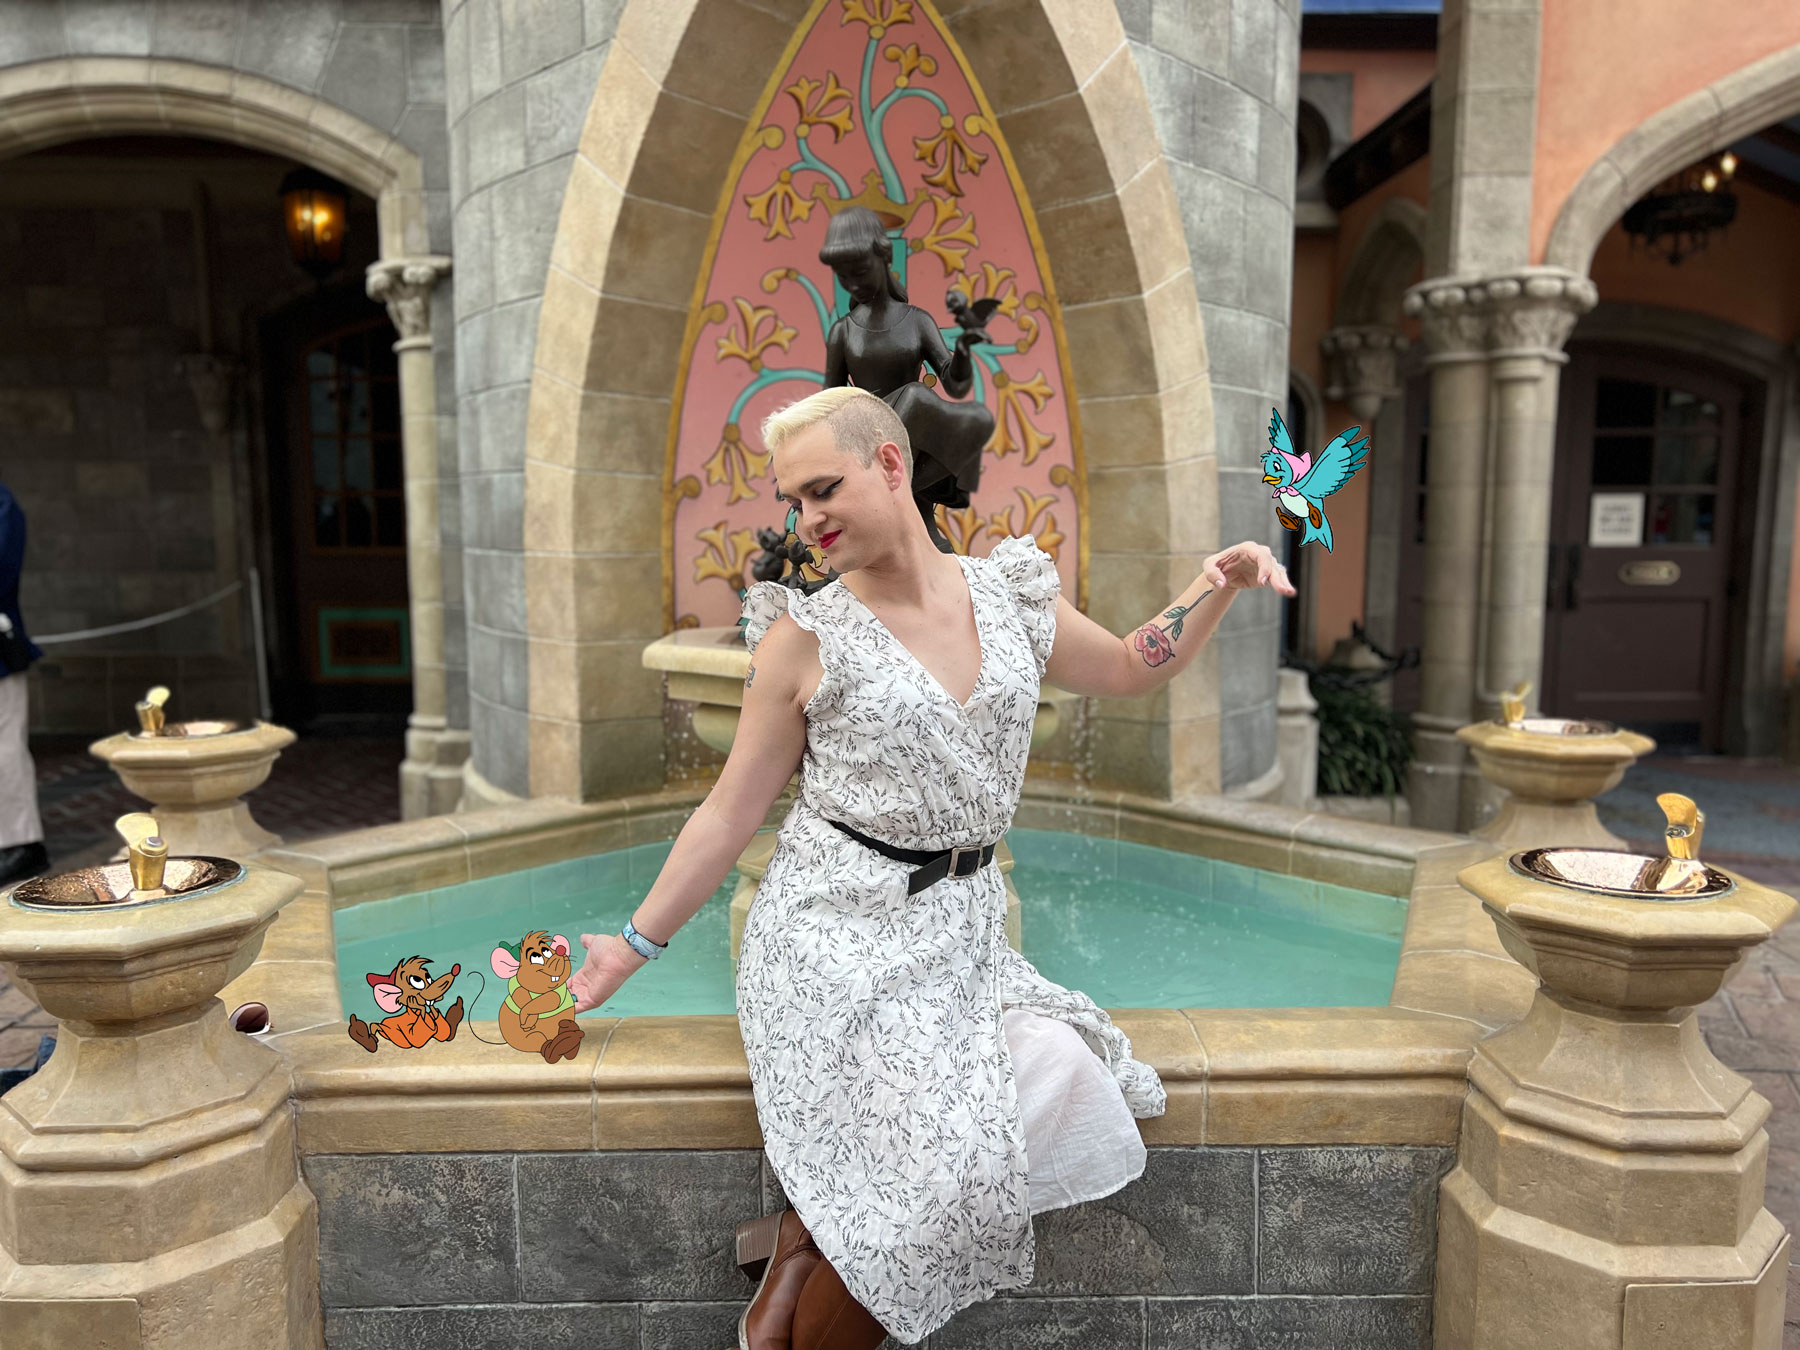 Alexis posing in front of the Cinderella fountain at Disney World, mimicking the sculpture's pose. Cartoon animals are superimposed on the image to make Alexis look like a Disney Princess.